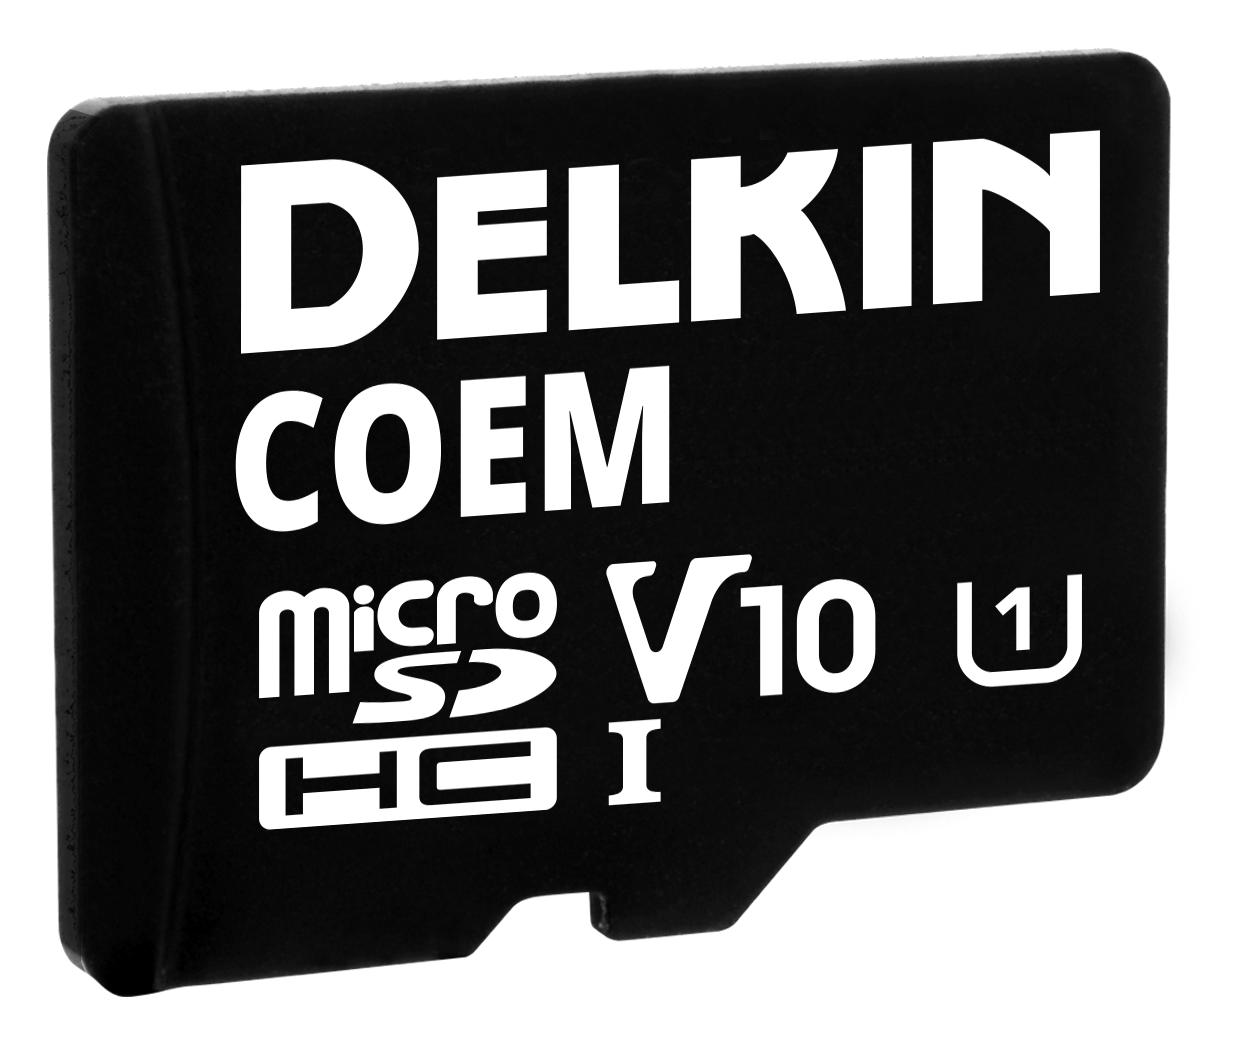 USDCOEM-16GB MEMORY CARD, MICRO SD, 16GB DELKIN DEVICES